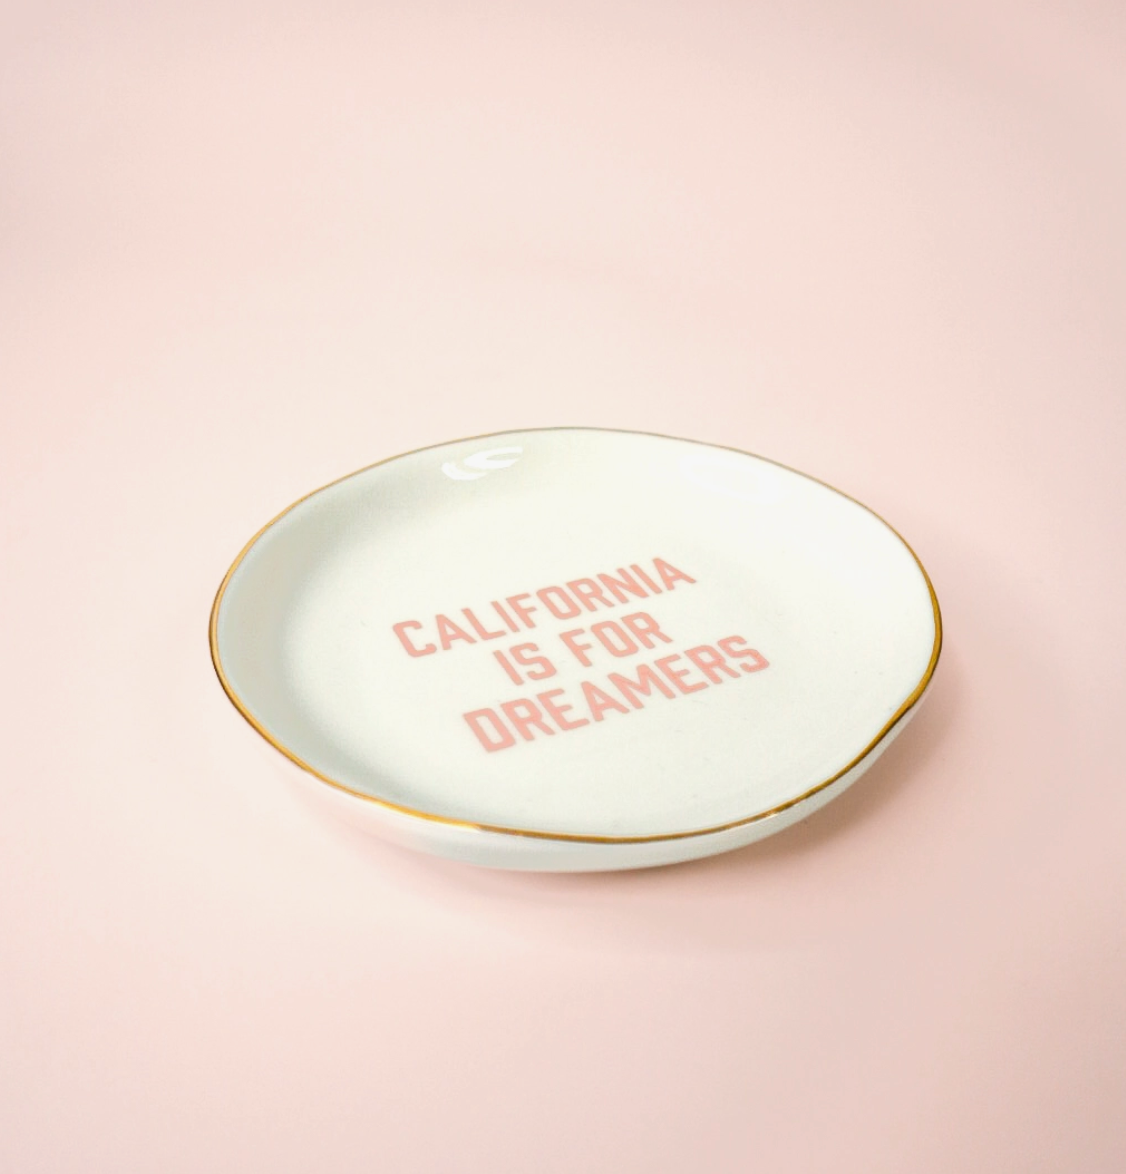 California Is For Dreamers Trinket Tray